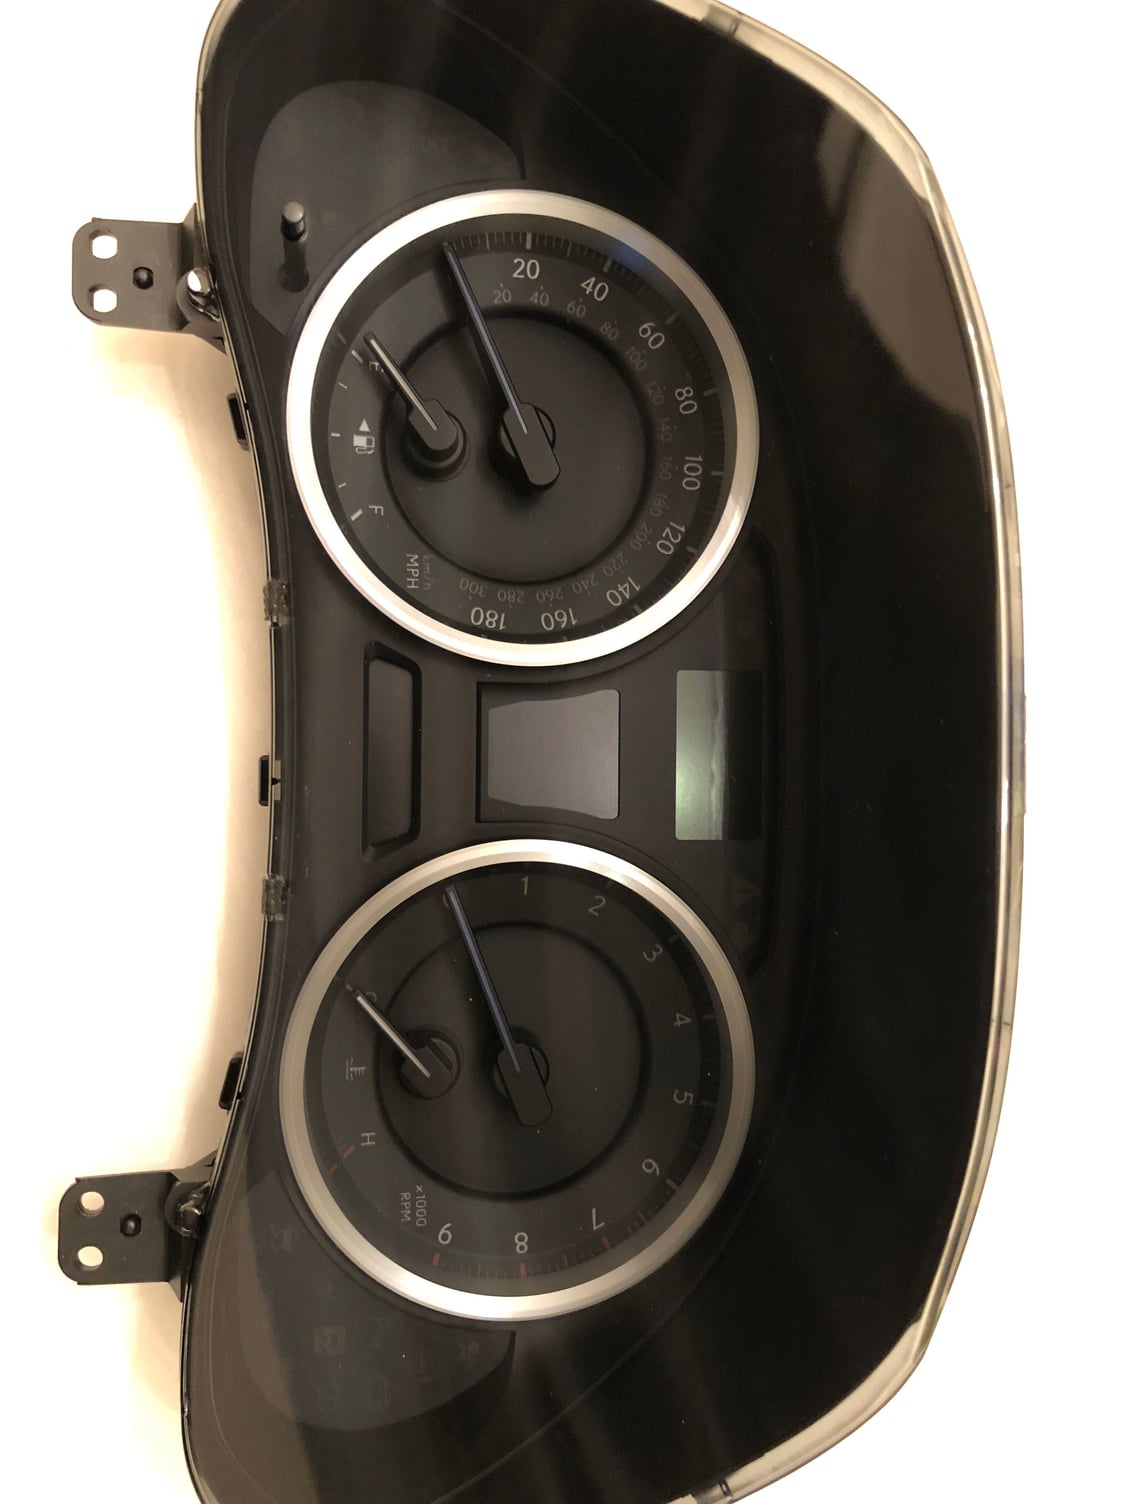 Interior/Upholstery - 2010 ISF IS-F instrument Cluster - Used - 2008 to 2014 Lexus IS F - 2006 to 2013 Lexus IS350 - 2006 to 2013 Lexus IS250 - Houston, TX 77082, United States